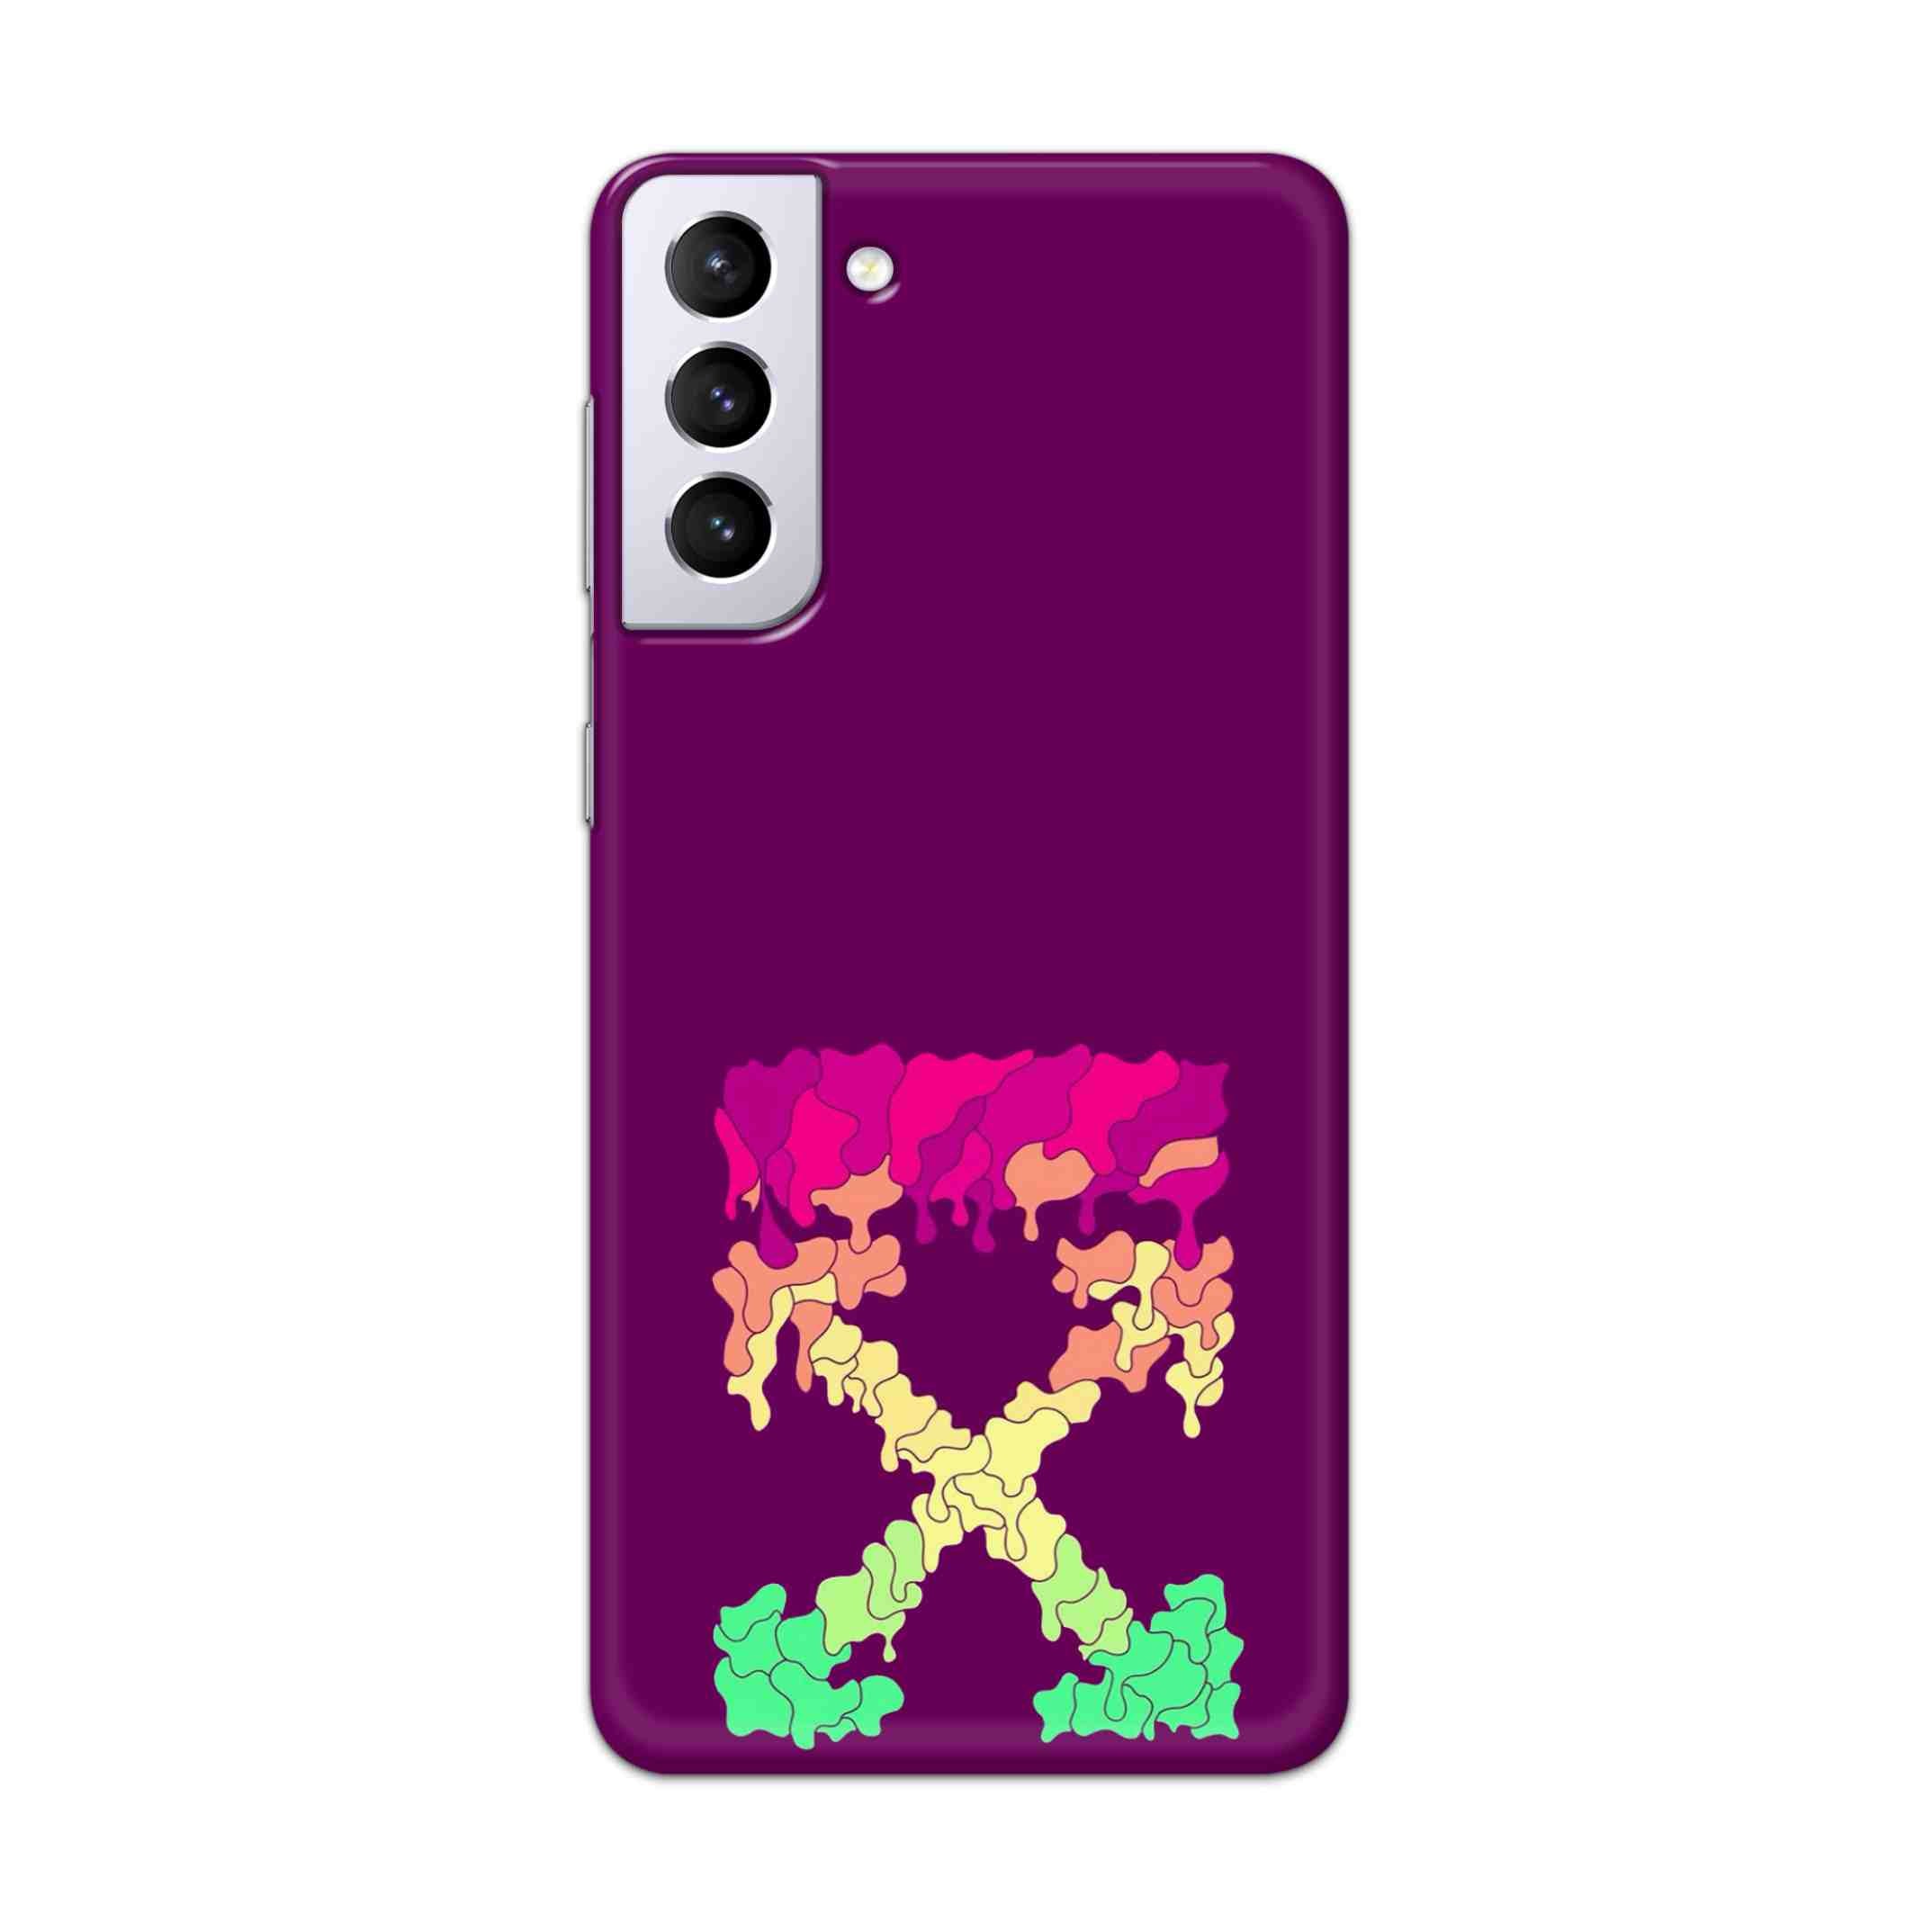 Buy X.O Hard Back Mobile Phone Case Cover For Samsung Galaxy S21 Plus Online